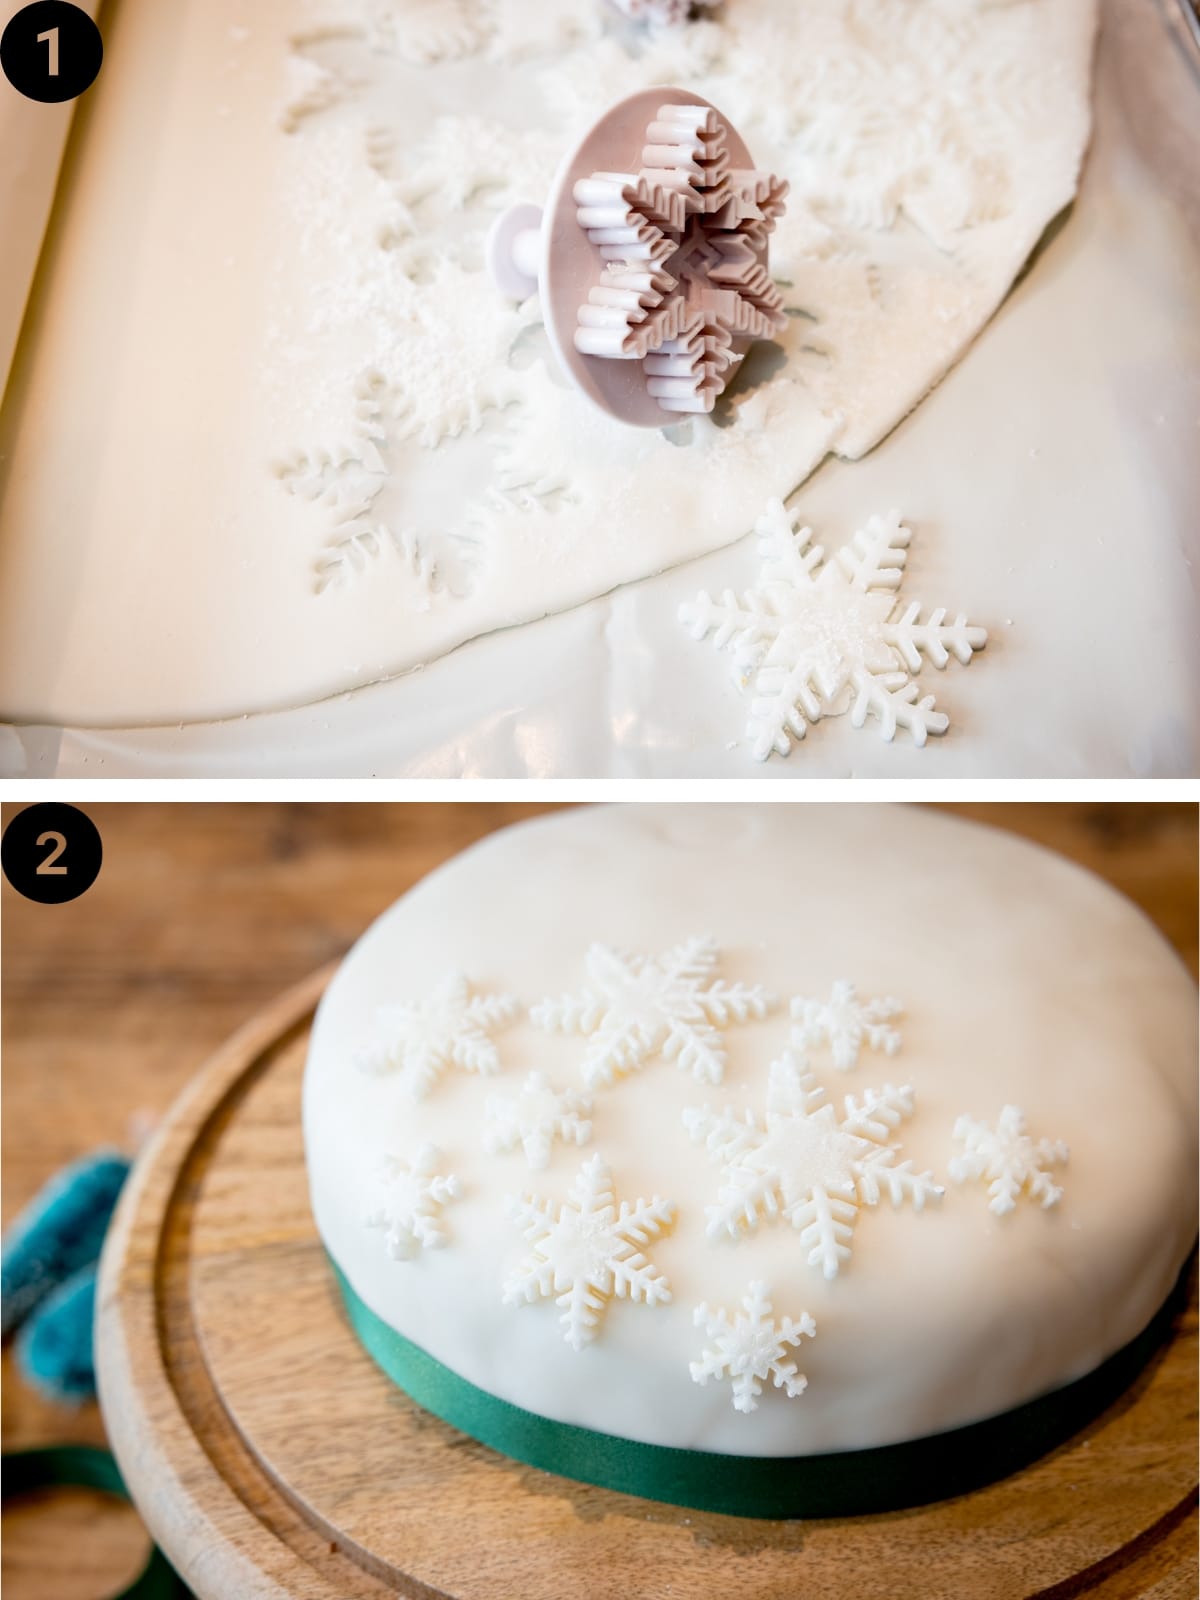 A two image collage. The top image shows snowflakes being cut from fondant icing with a snowflake cutter. The bottom image shows these snowflakes arranged on an iced Christmas cake. The cake has a green ribbon around it and is sitting on a wooden cake stand.